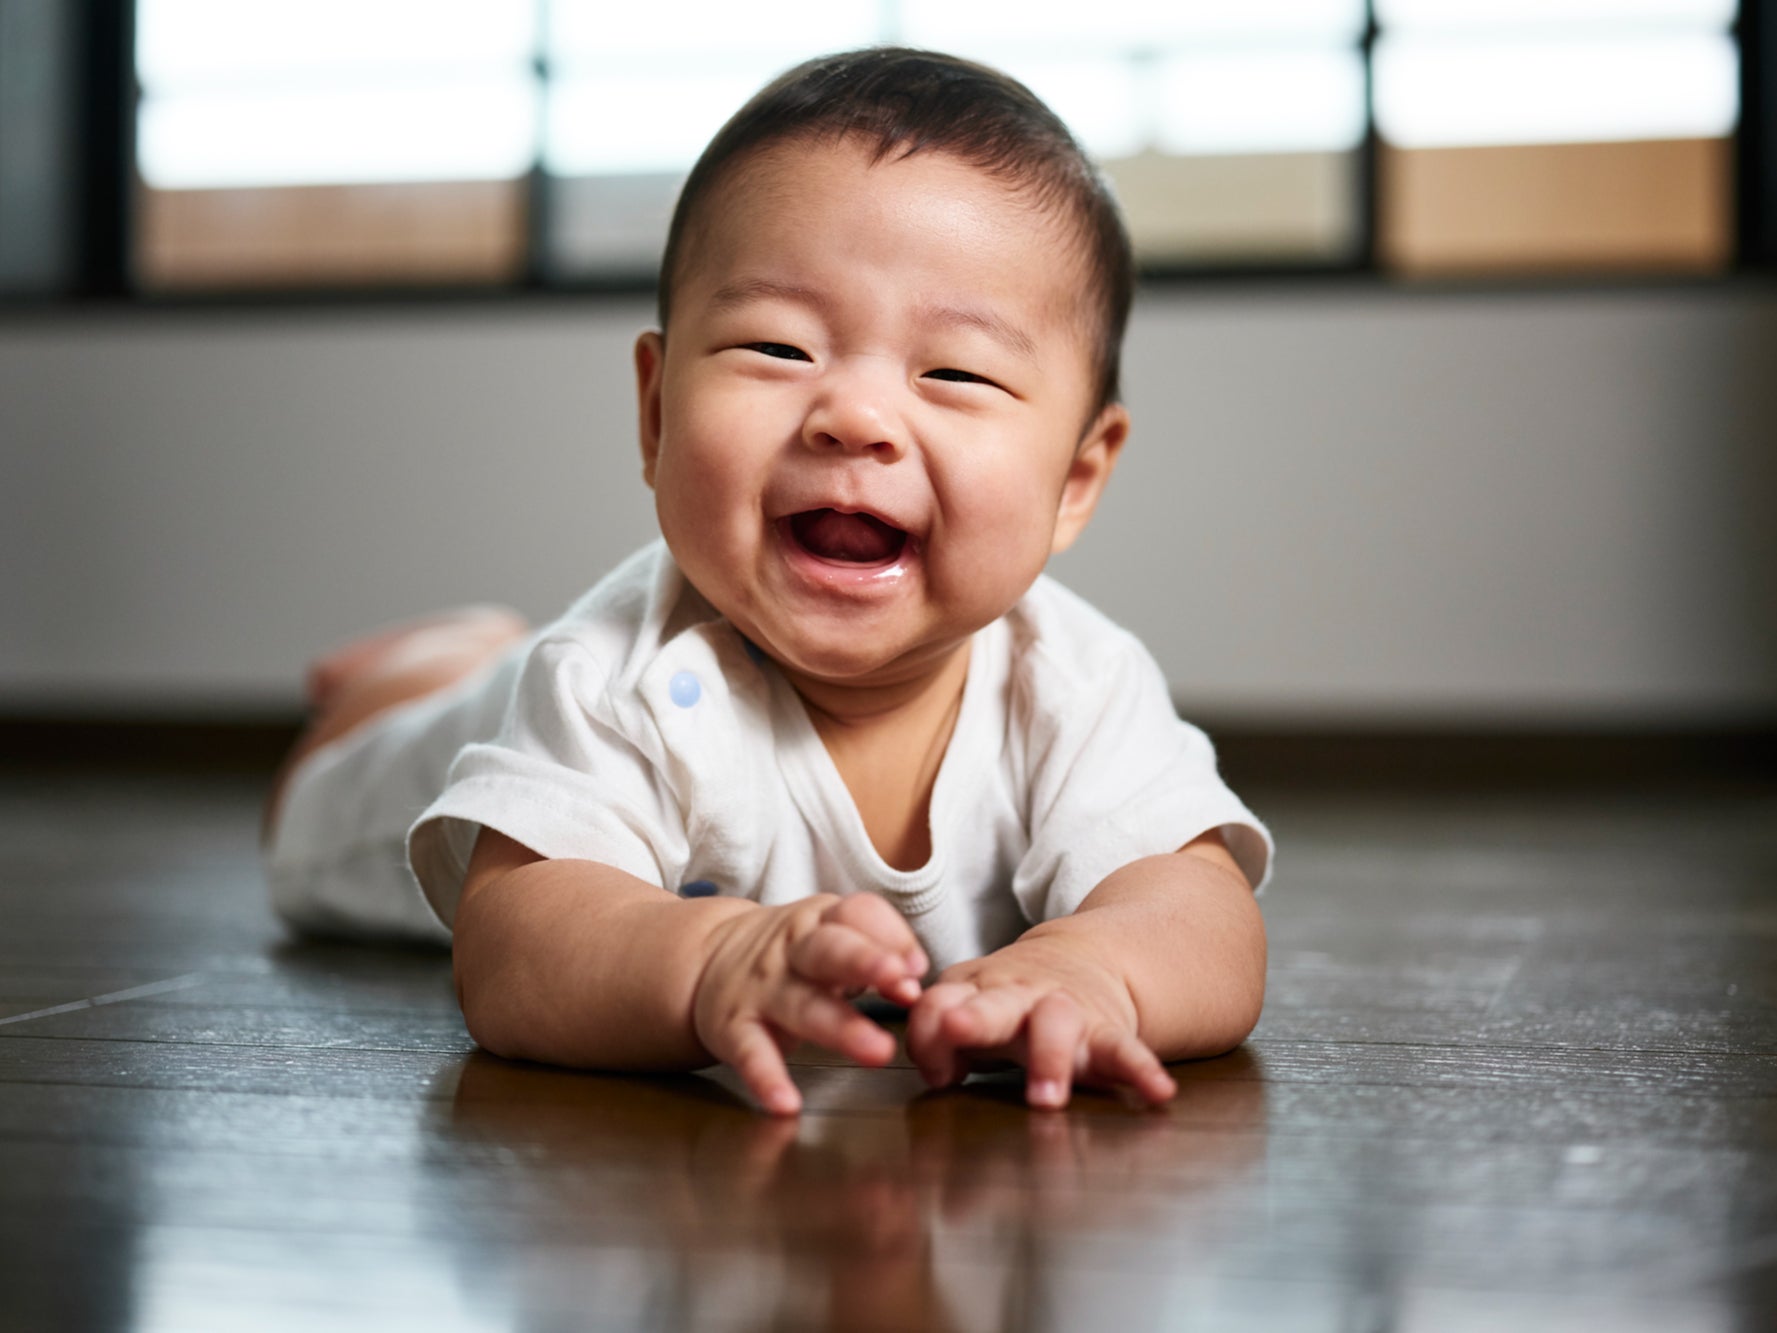 The number of babies born in Japan fell for an eighth straight year